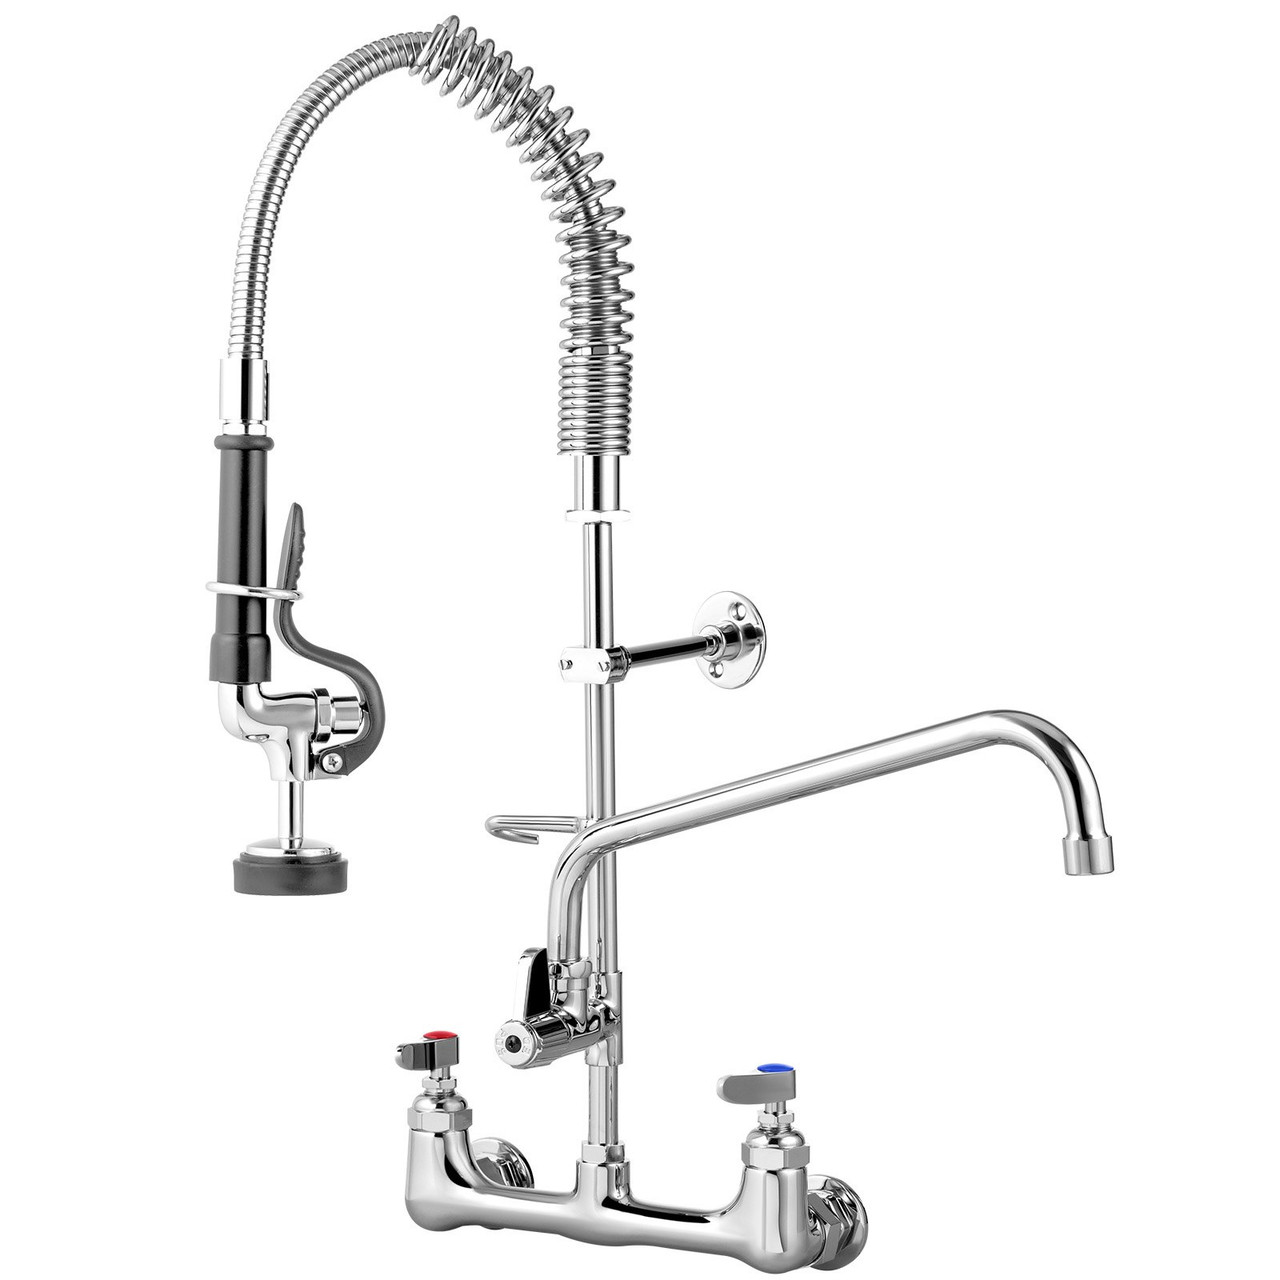 Commercial Faucet Pre-Rinse with Sprayer, 8" Adjustable Center Wall Mount Kitchen Faucet with 12" Swivel Spout, 36" Height Compartment Sink Faucet